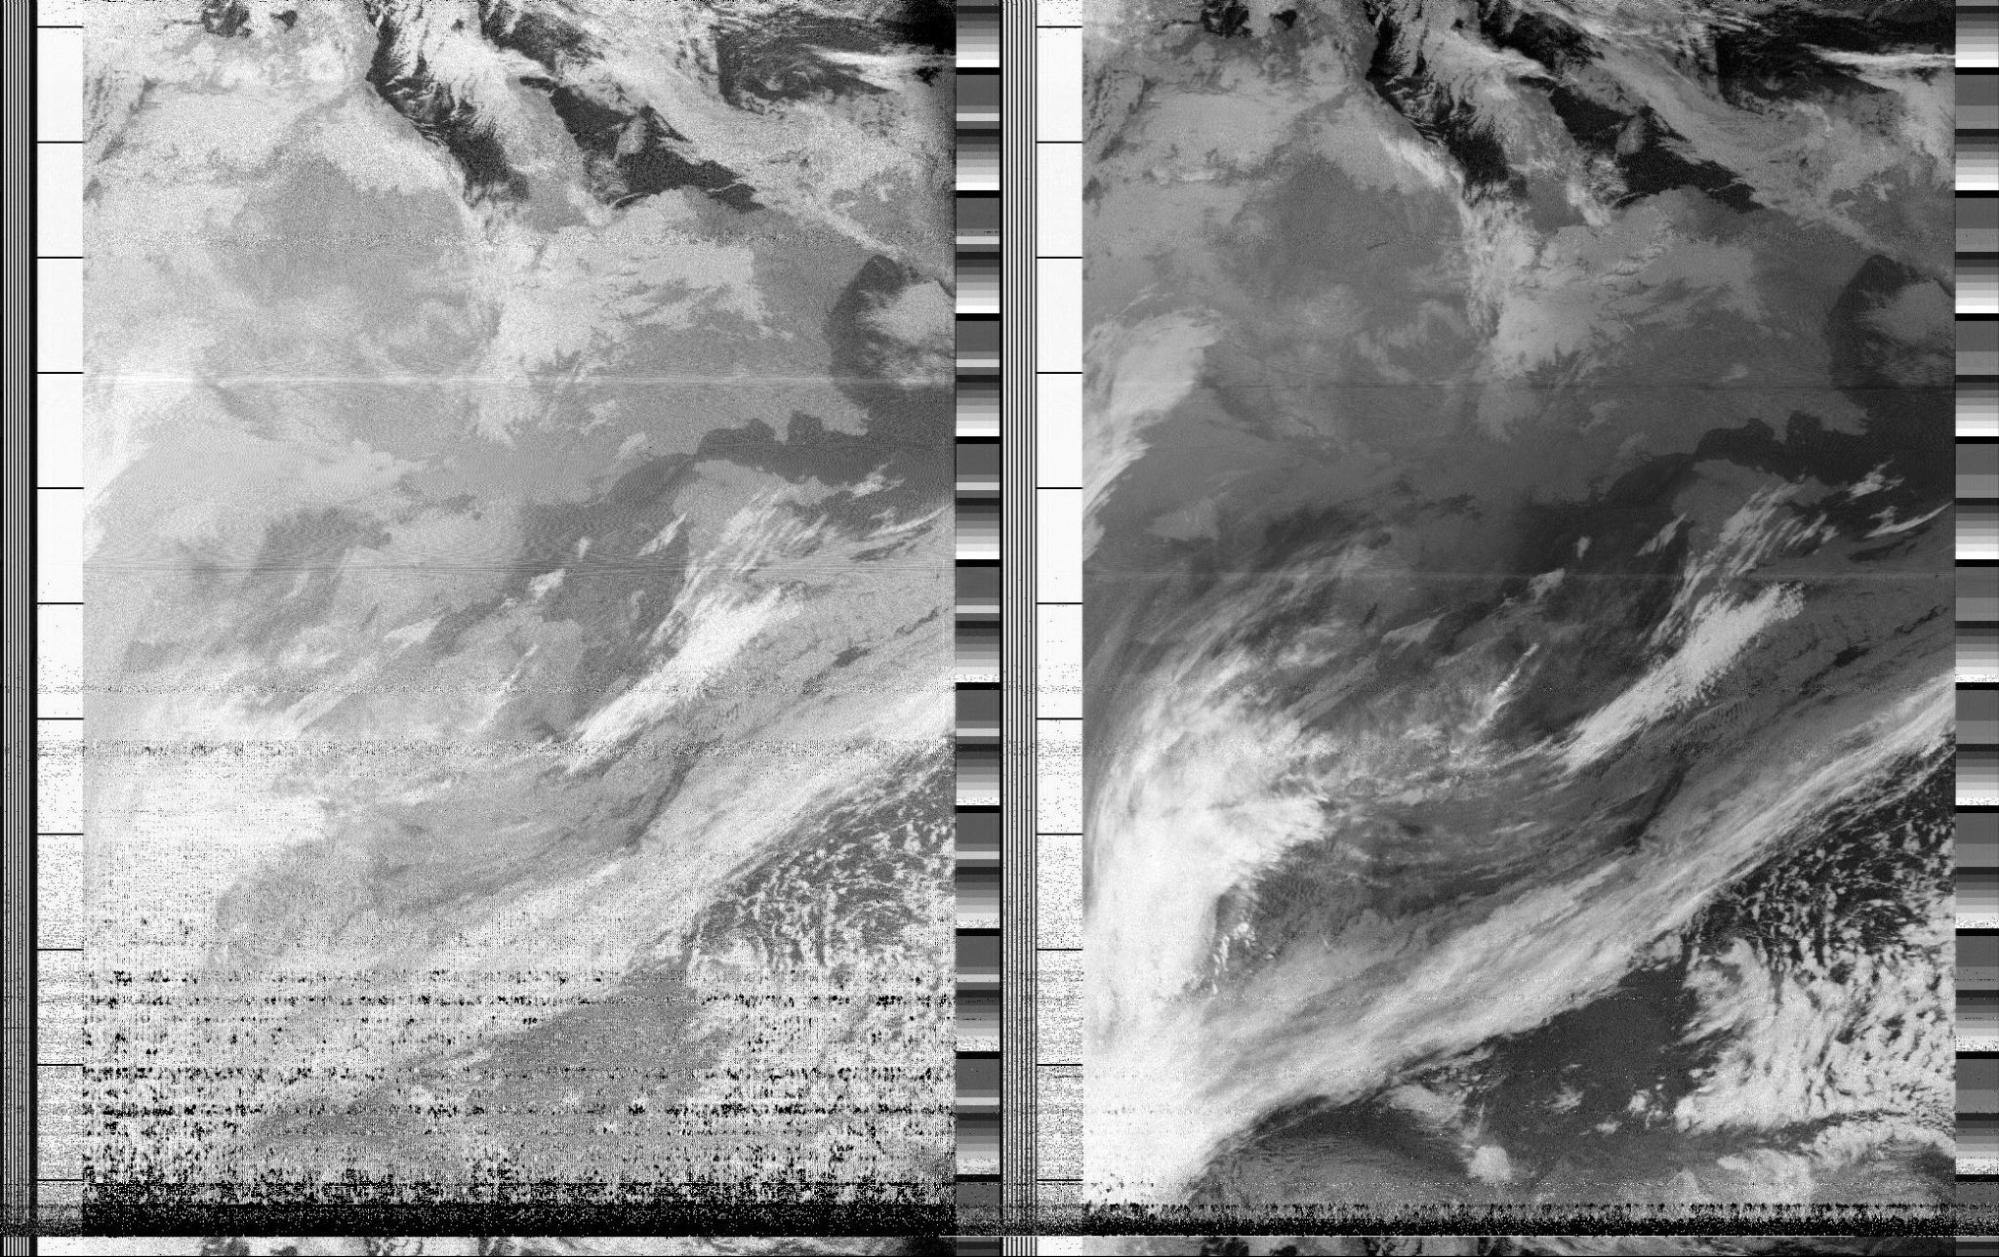 Image from NOAA-15 satellite received on July 2nd 2023. [Two grayscale images showing abstracted cloud formations, land masses, oceans, and jet streams.] 

